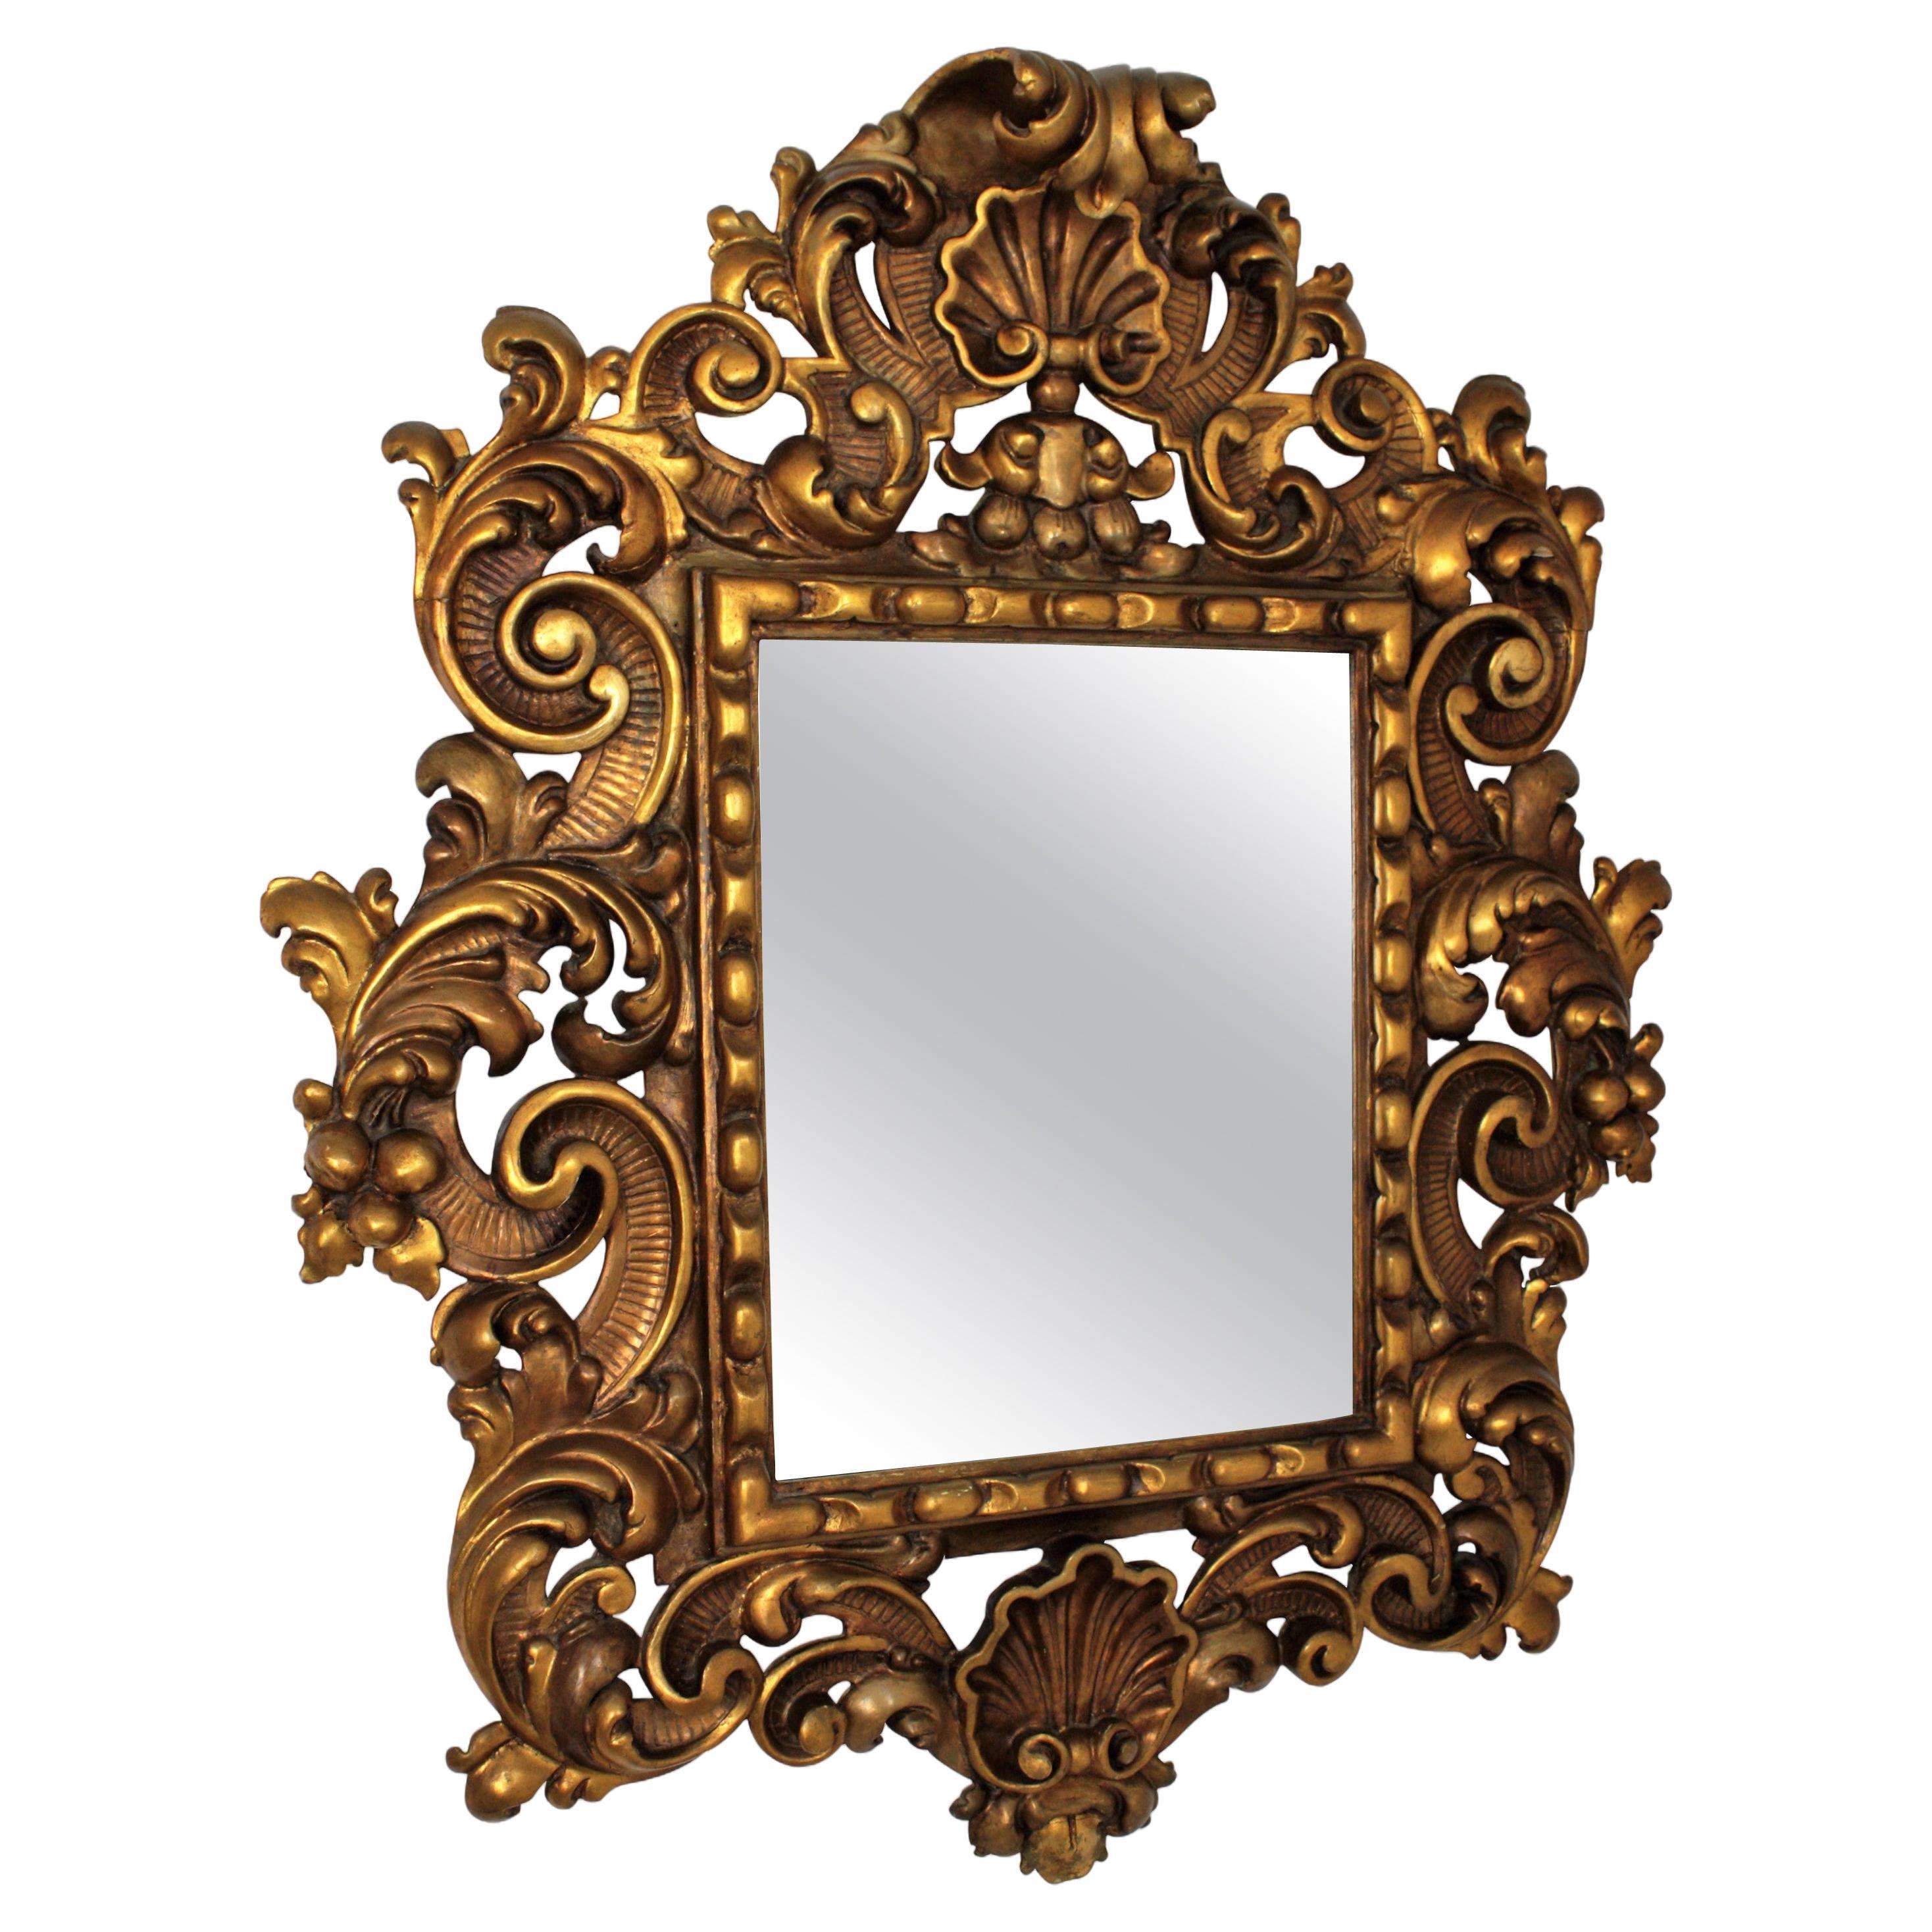 Spanish Rococo Style Foliage Carved Giltwood Mirror For Sale